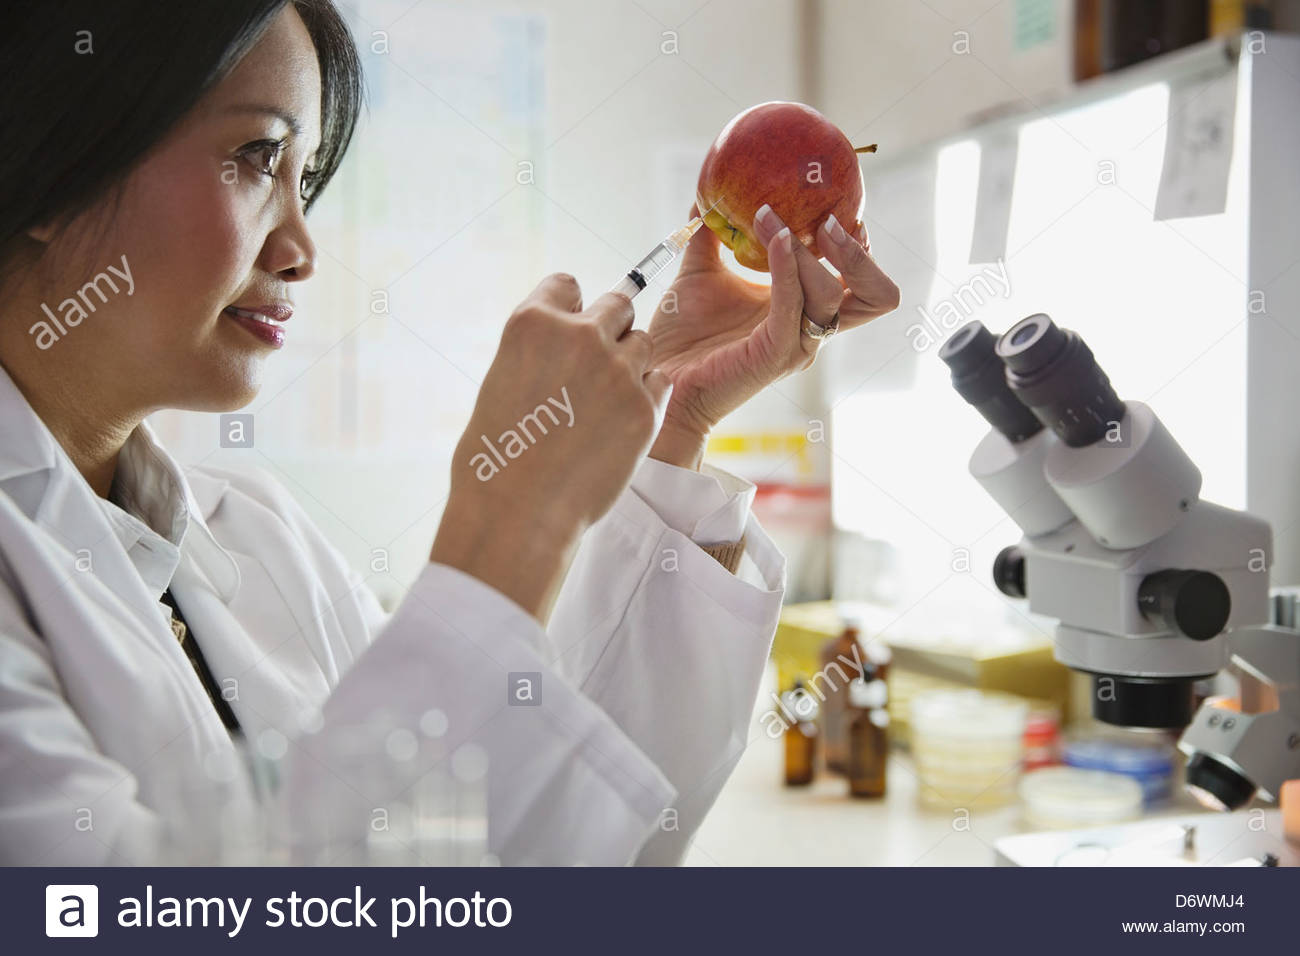 Female scientist injecting liquid into an apple in laboratory Stock Photo